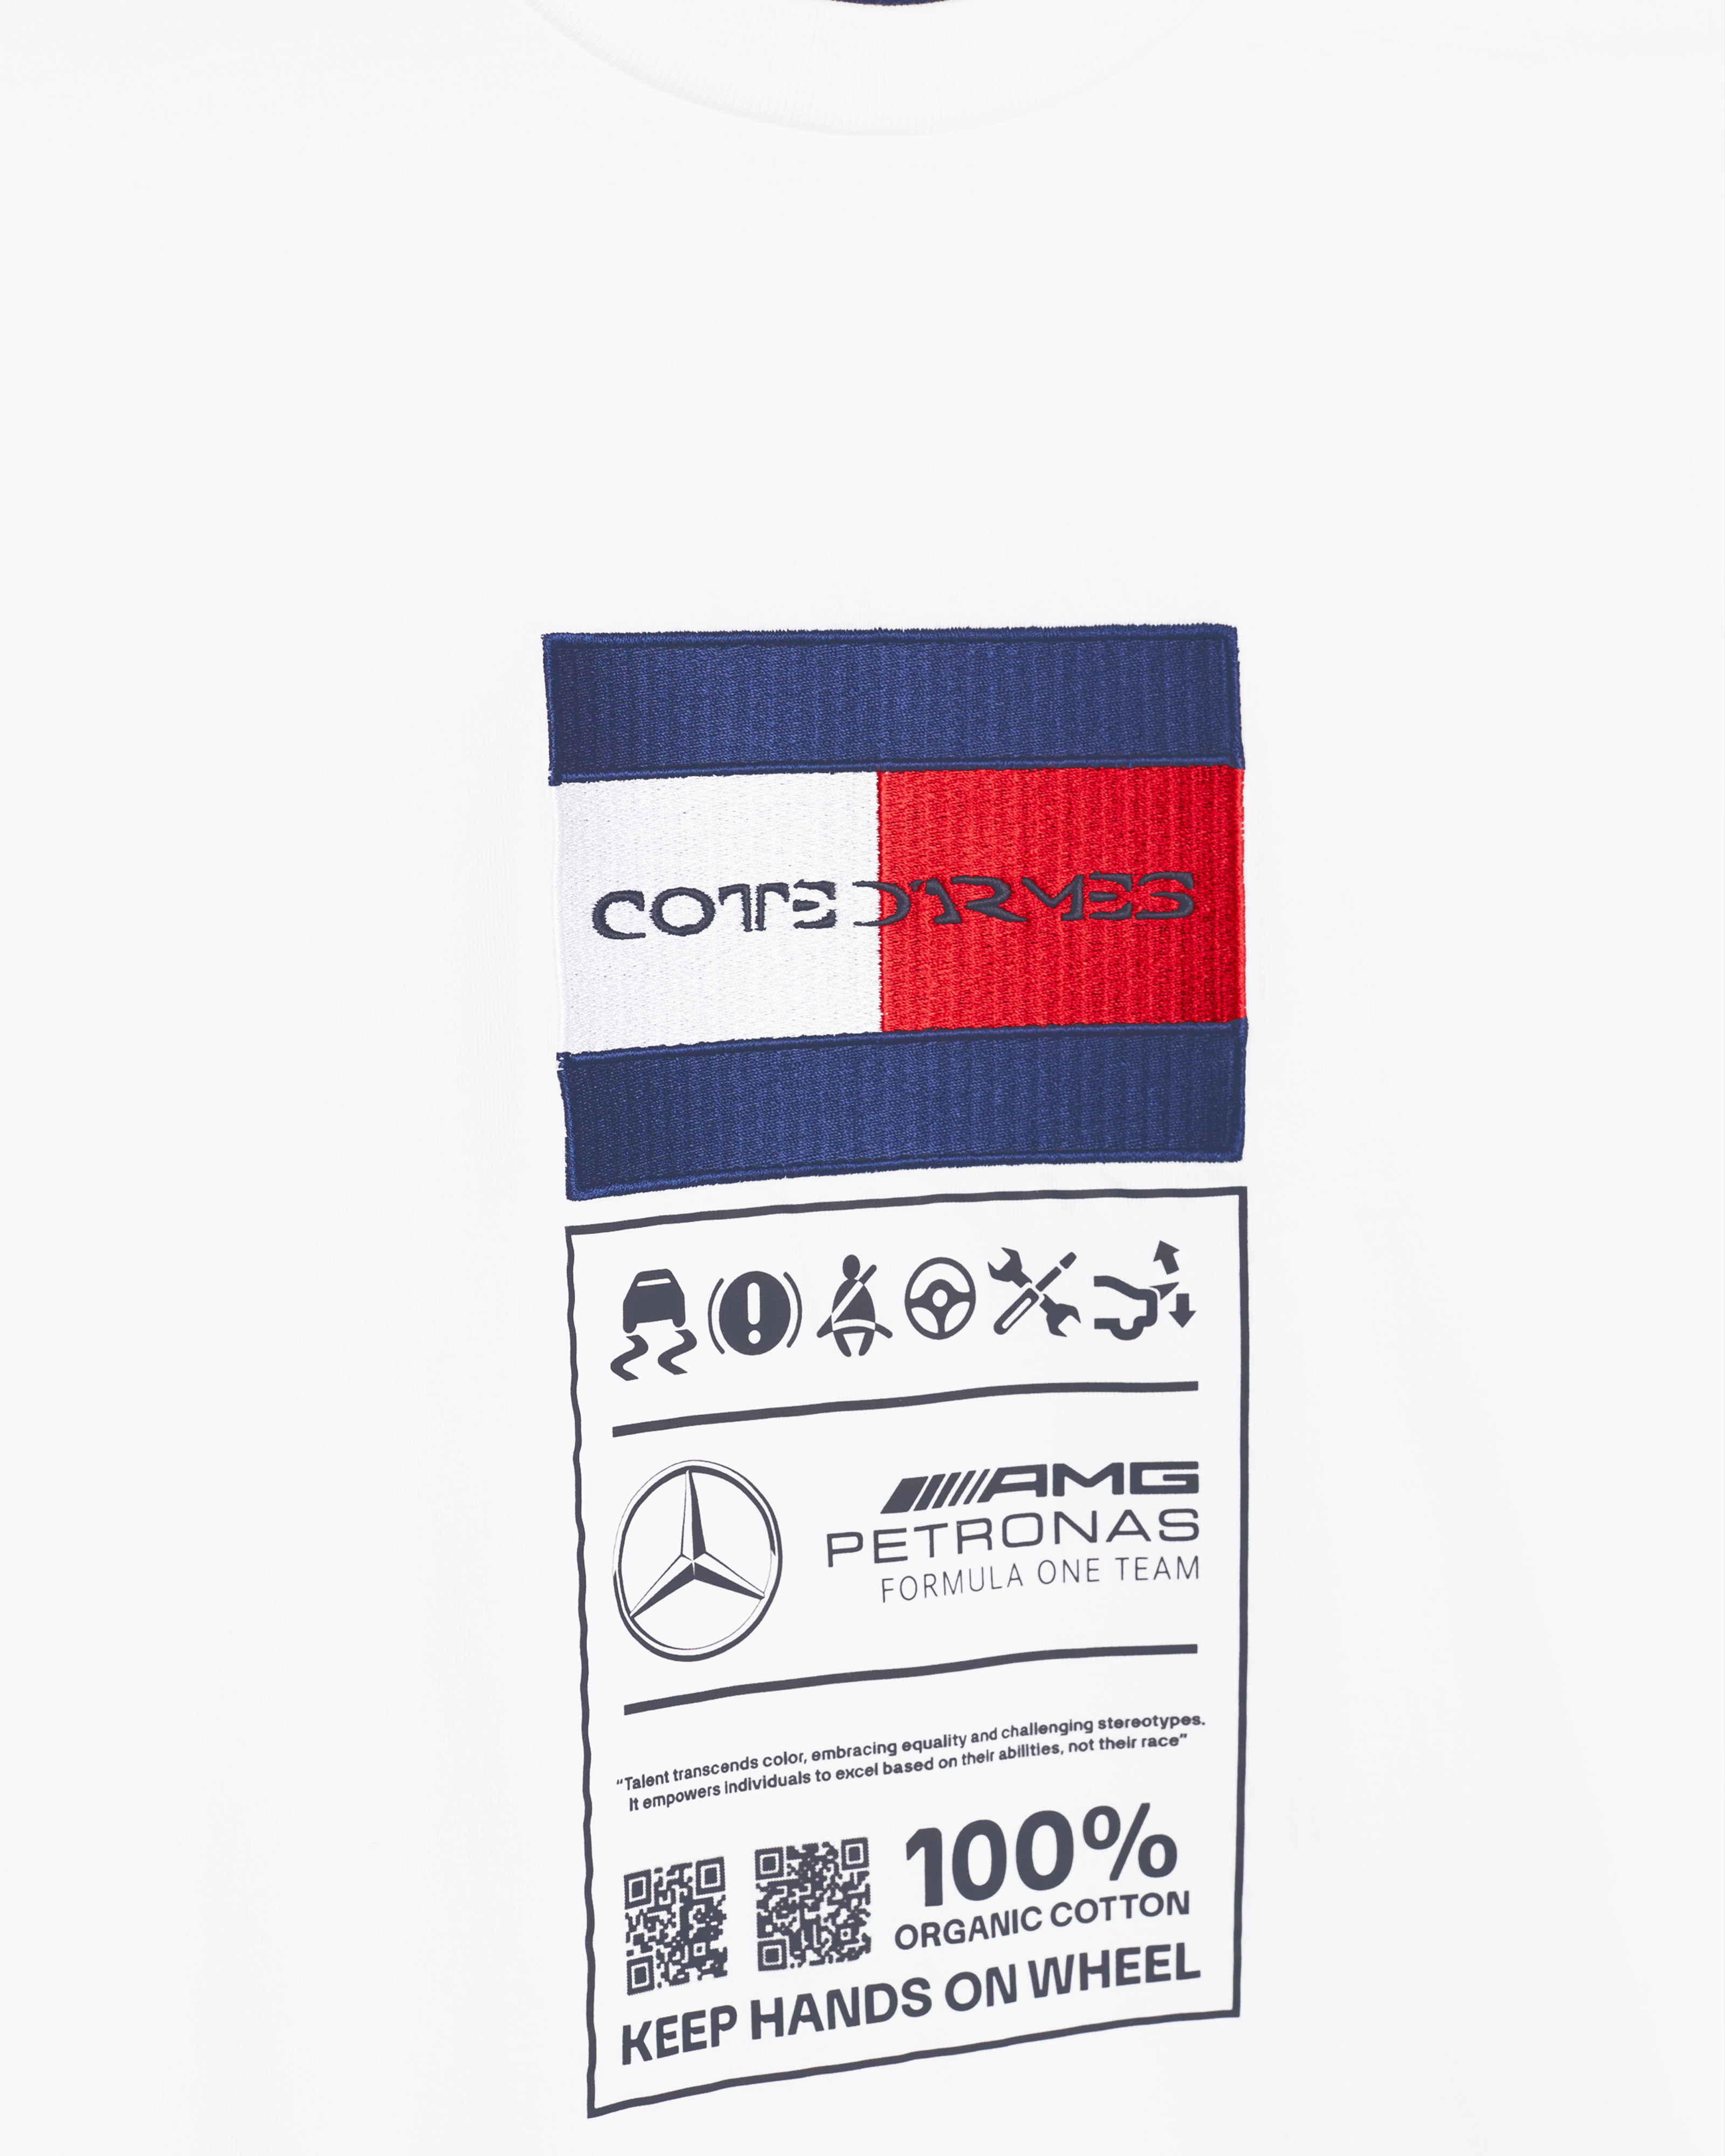 Tommy x Mercedes-AMG F1 x Clarence Ruth Label Tee White